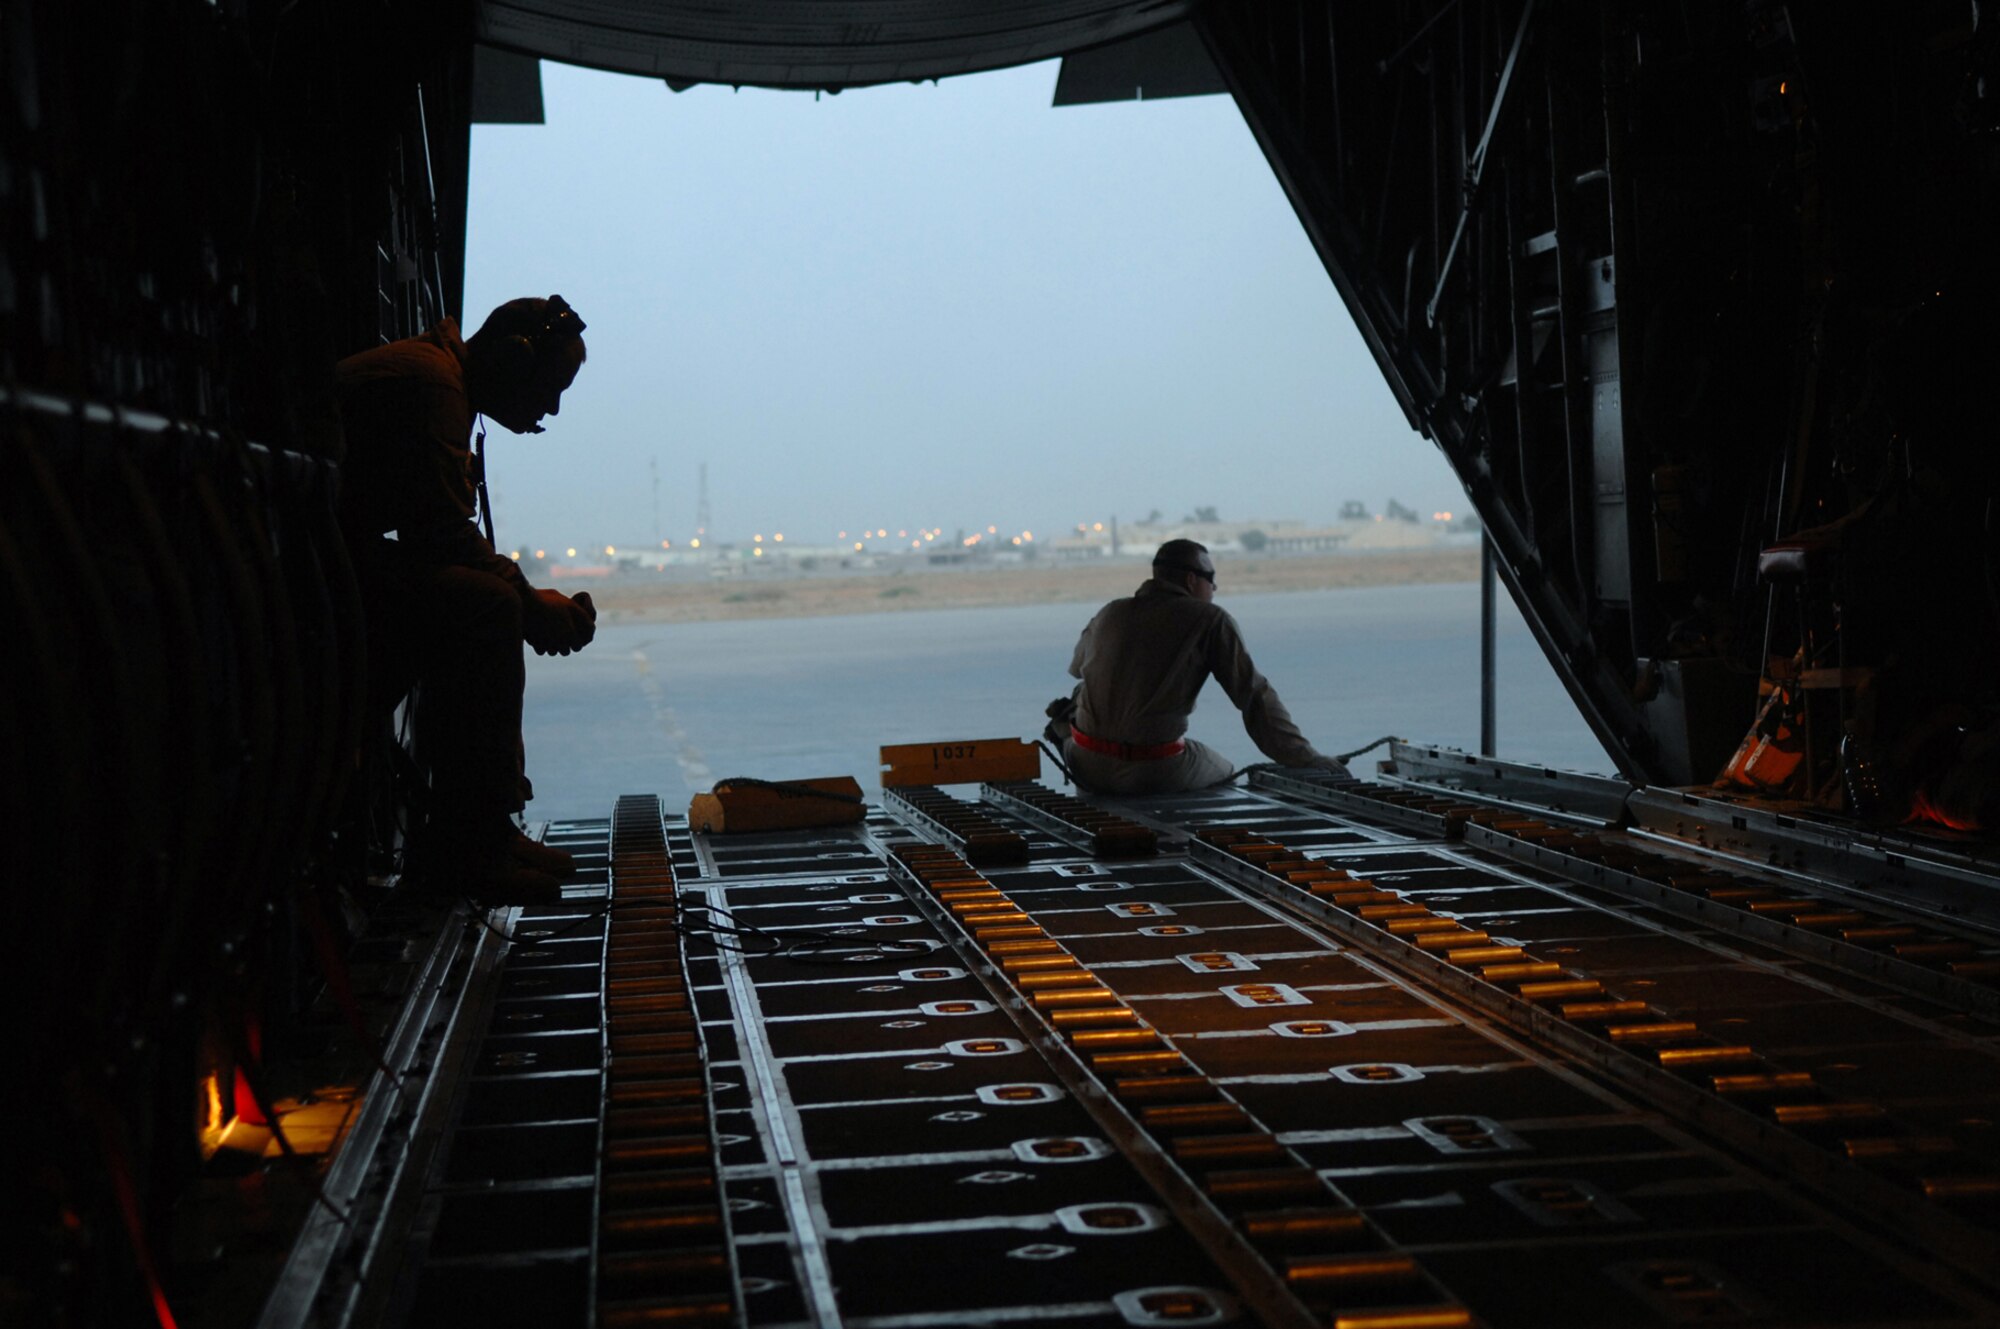 BALAD AIR BASE, Iraq -- Airman 1st Class Nicholas Ellwood and Staff Sgt. Ronnie James, 777th Expeditionary Airlift Squadron loadmasters, wait for cargo and passengers to be loaded onto a C-130 Hercules during a combat mission in Southwest Asia, May 7. The 777 EAS personnel estimate they have prevented approximately 10,000 convoy vehicles and about 27,000 servicemembers from traveling along improvised explosive device laden Iraqi roads since the squadron stood up in January 2006. This was accomplished by providing air transport via C-130 aircraft, the 'work horse' of the Air Force fleet. Airman Ellwood and Sergeant James are deployed from Little Rock Air Force Base, Ark. (U.S. Air Force photo/ Senior Airman Julianne Showalter)